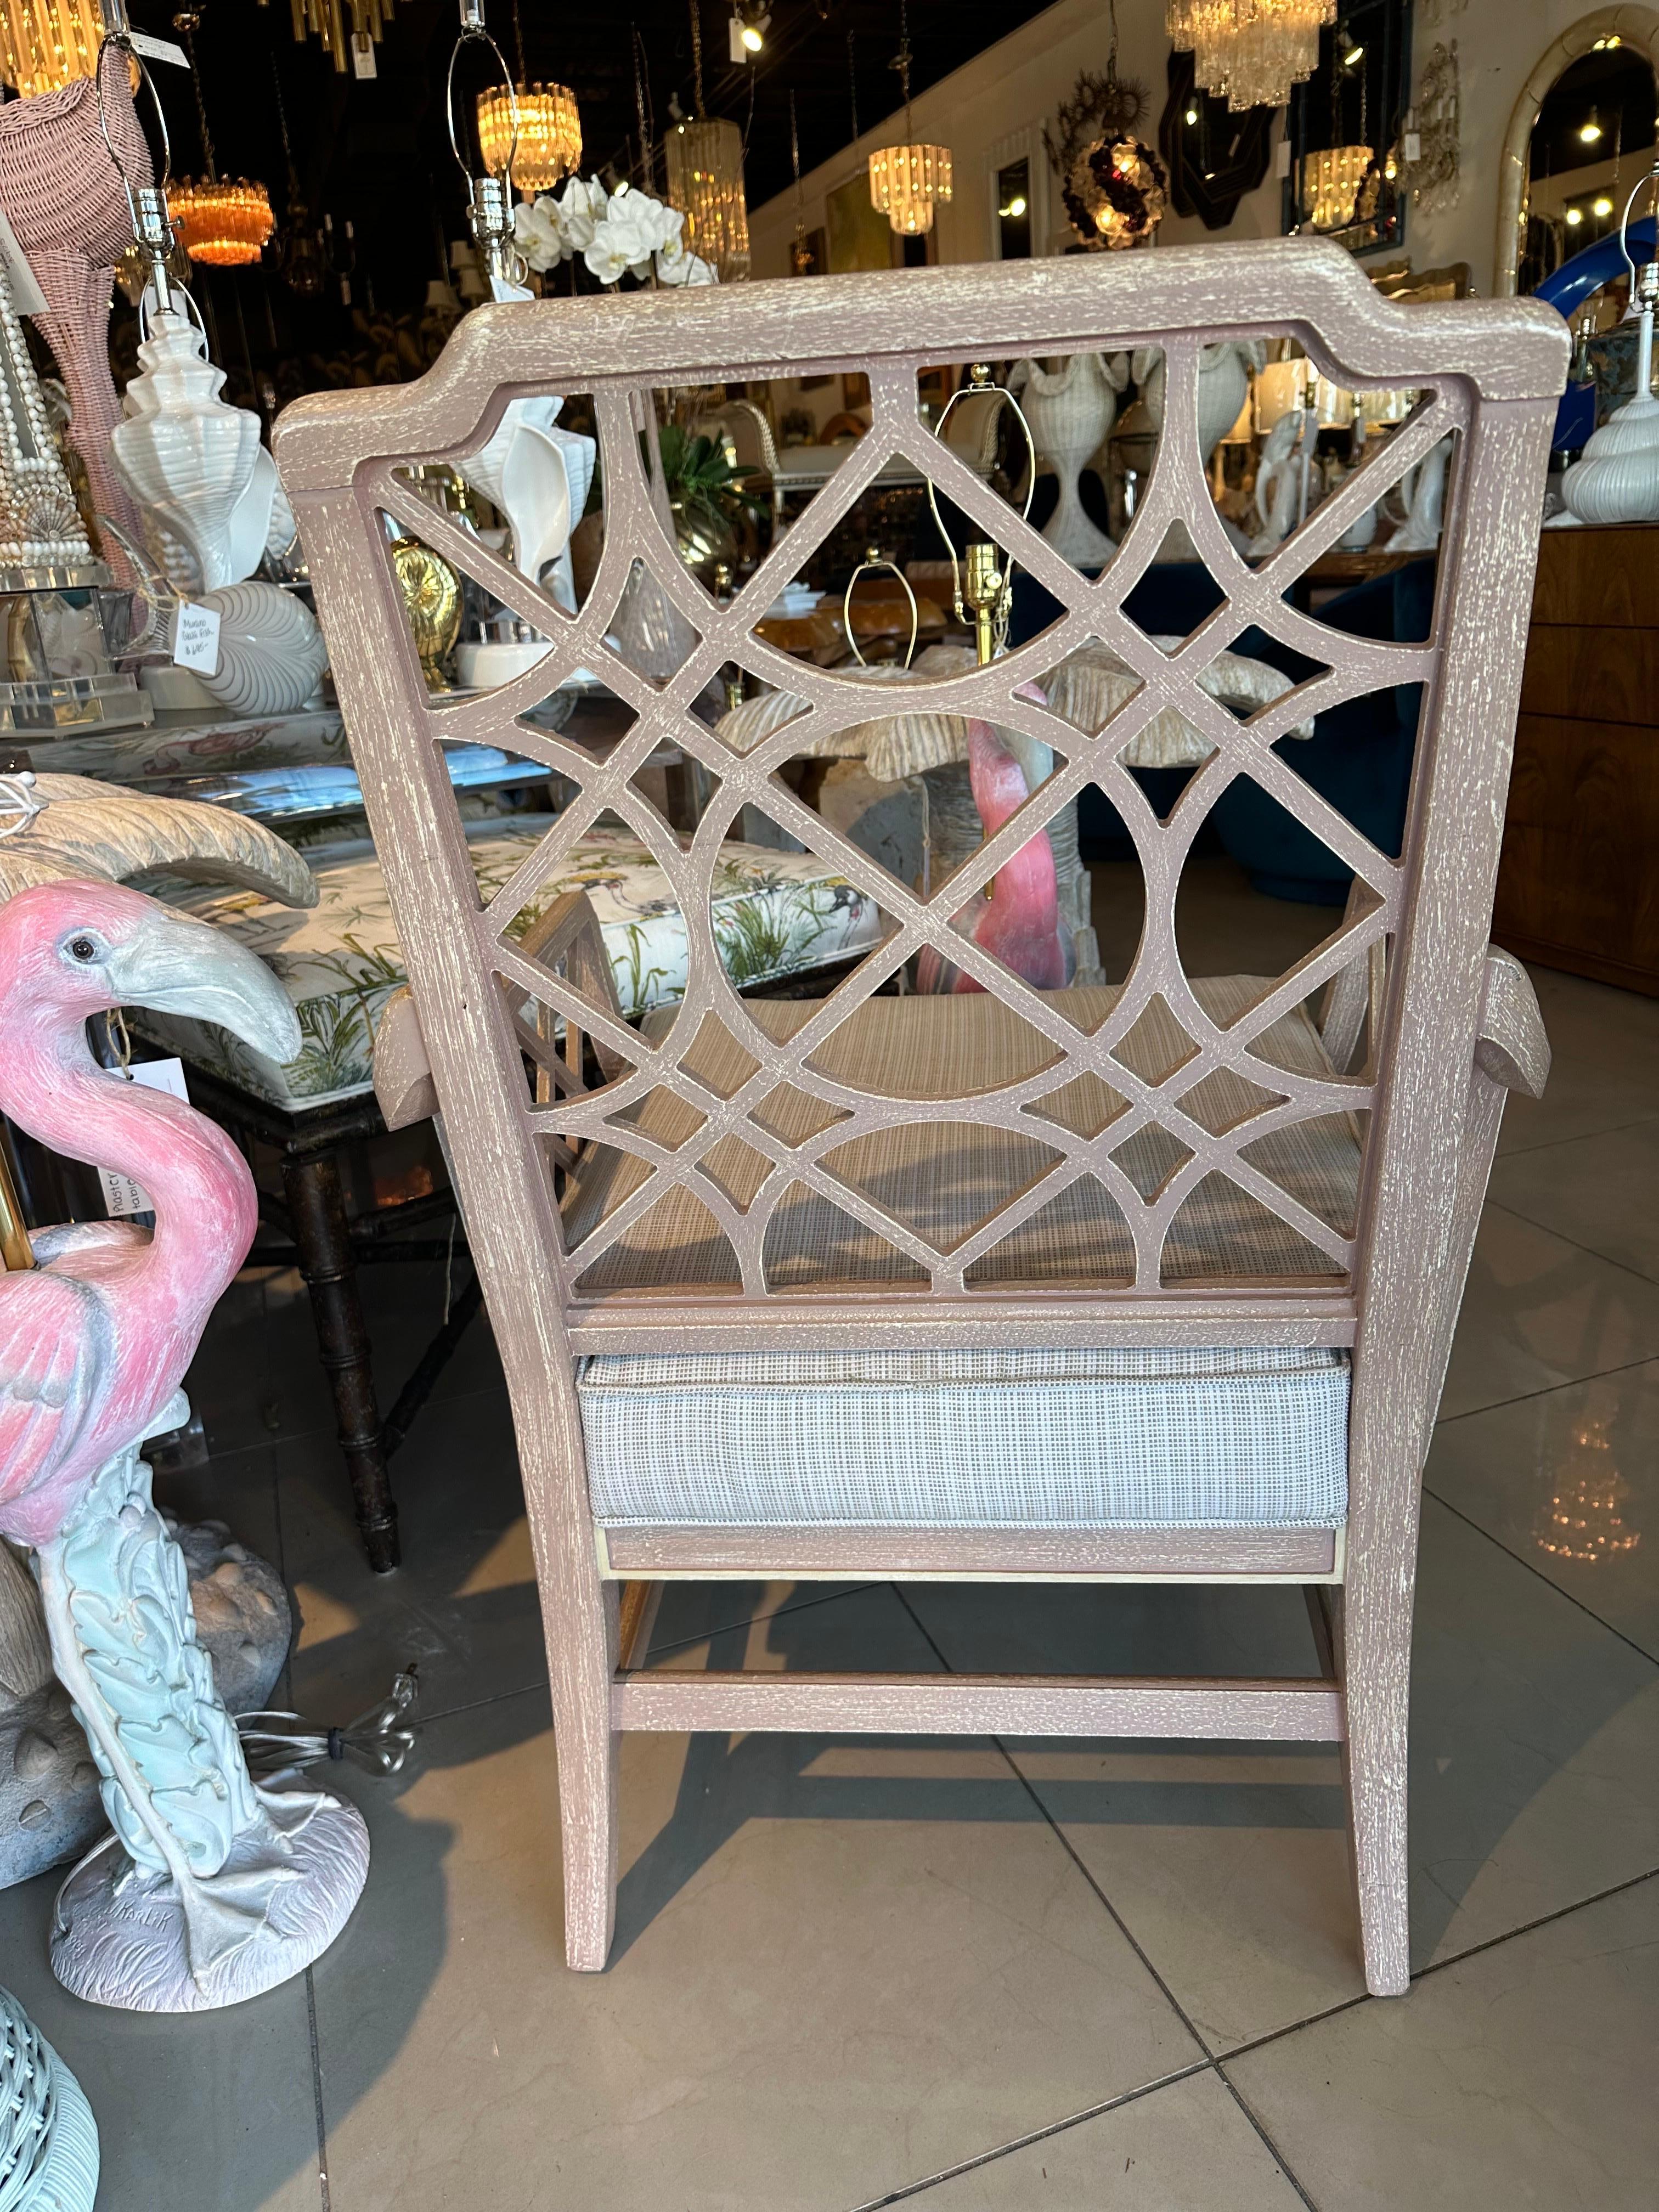 Vintage Palm Beach Chinese Chippendale Fretwork Fret Work armchair arm chair, club lounge. Original finish and recently newly upholstered cushion. I cannot find any flaws on the finish or the cushion. Dimensions: 38 H x 27 W x 30 D, overall x 18.5